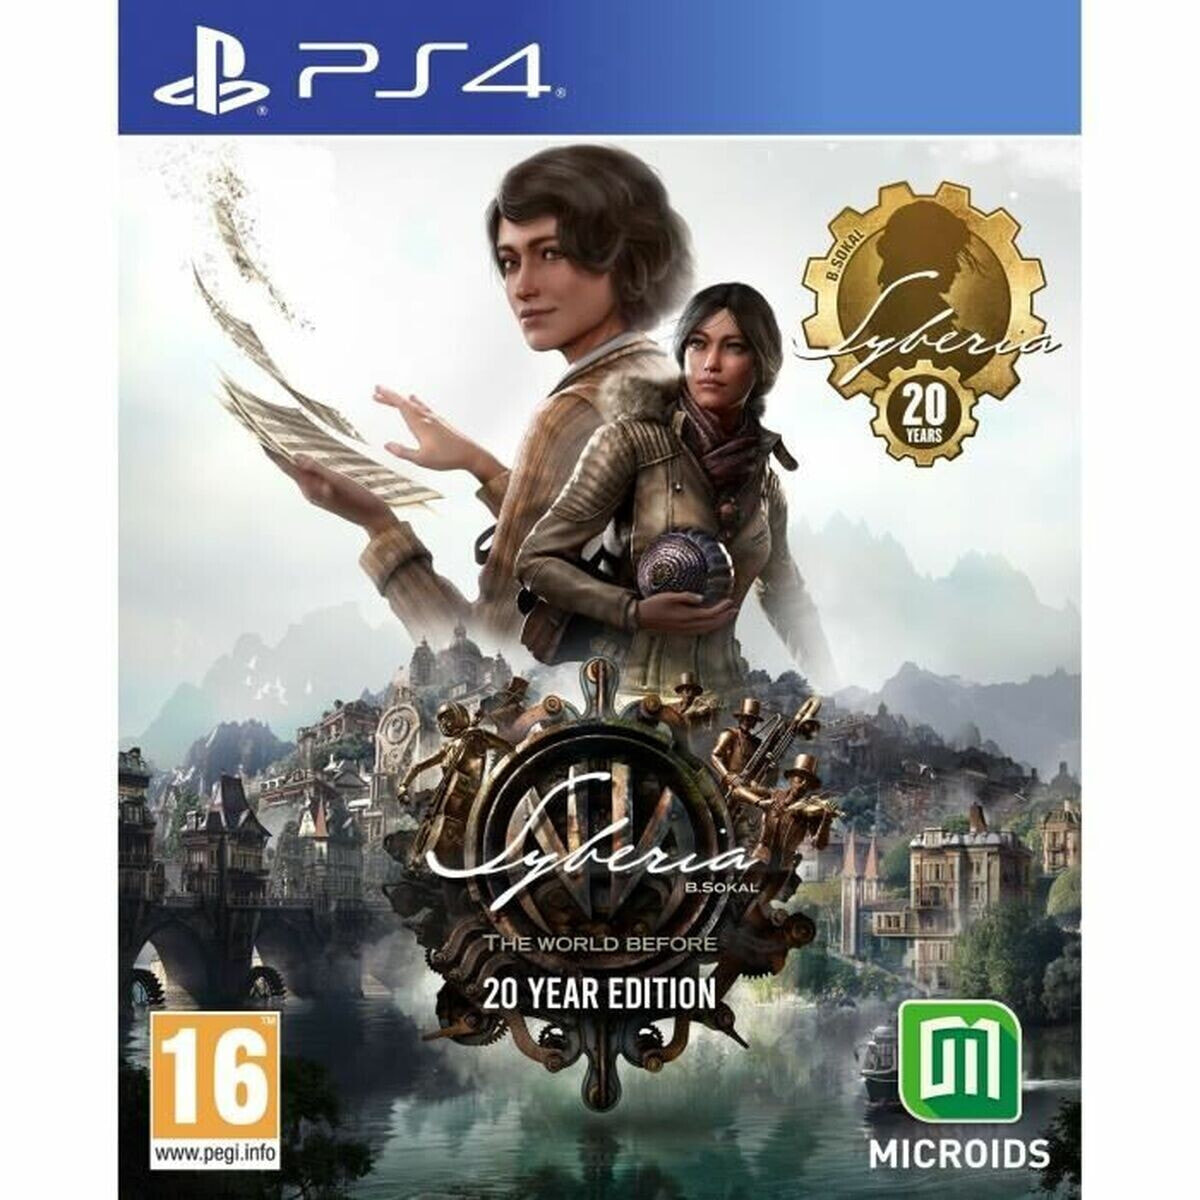 Видеоигры PlayStation 4 Microids Syberia: The World Before - 20 Year Edition (FR)